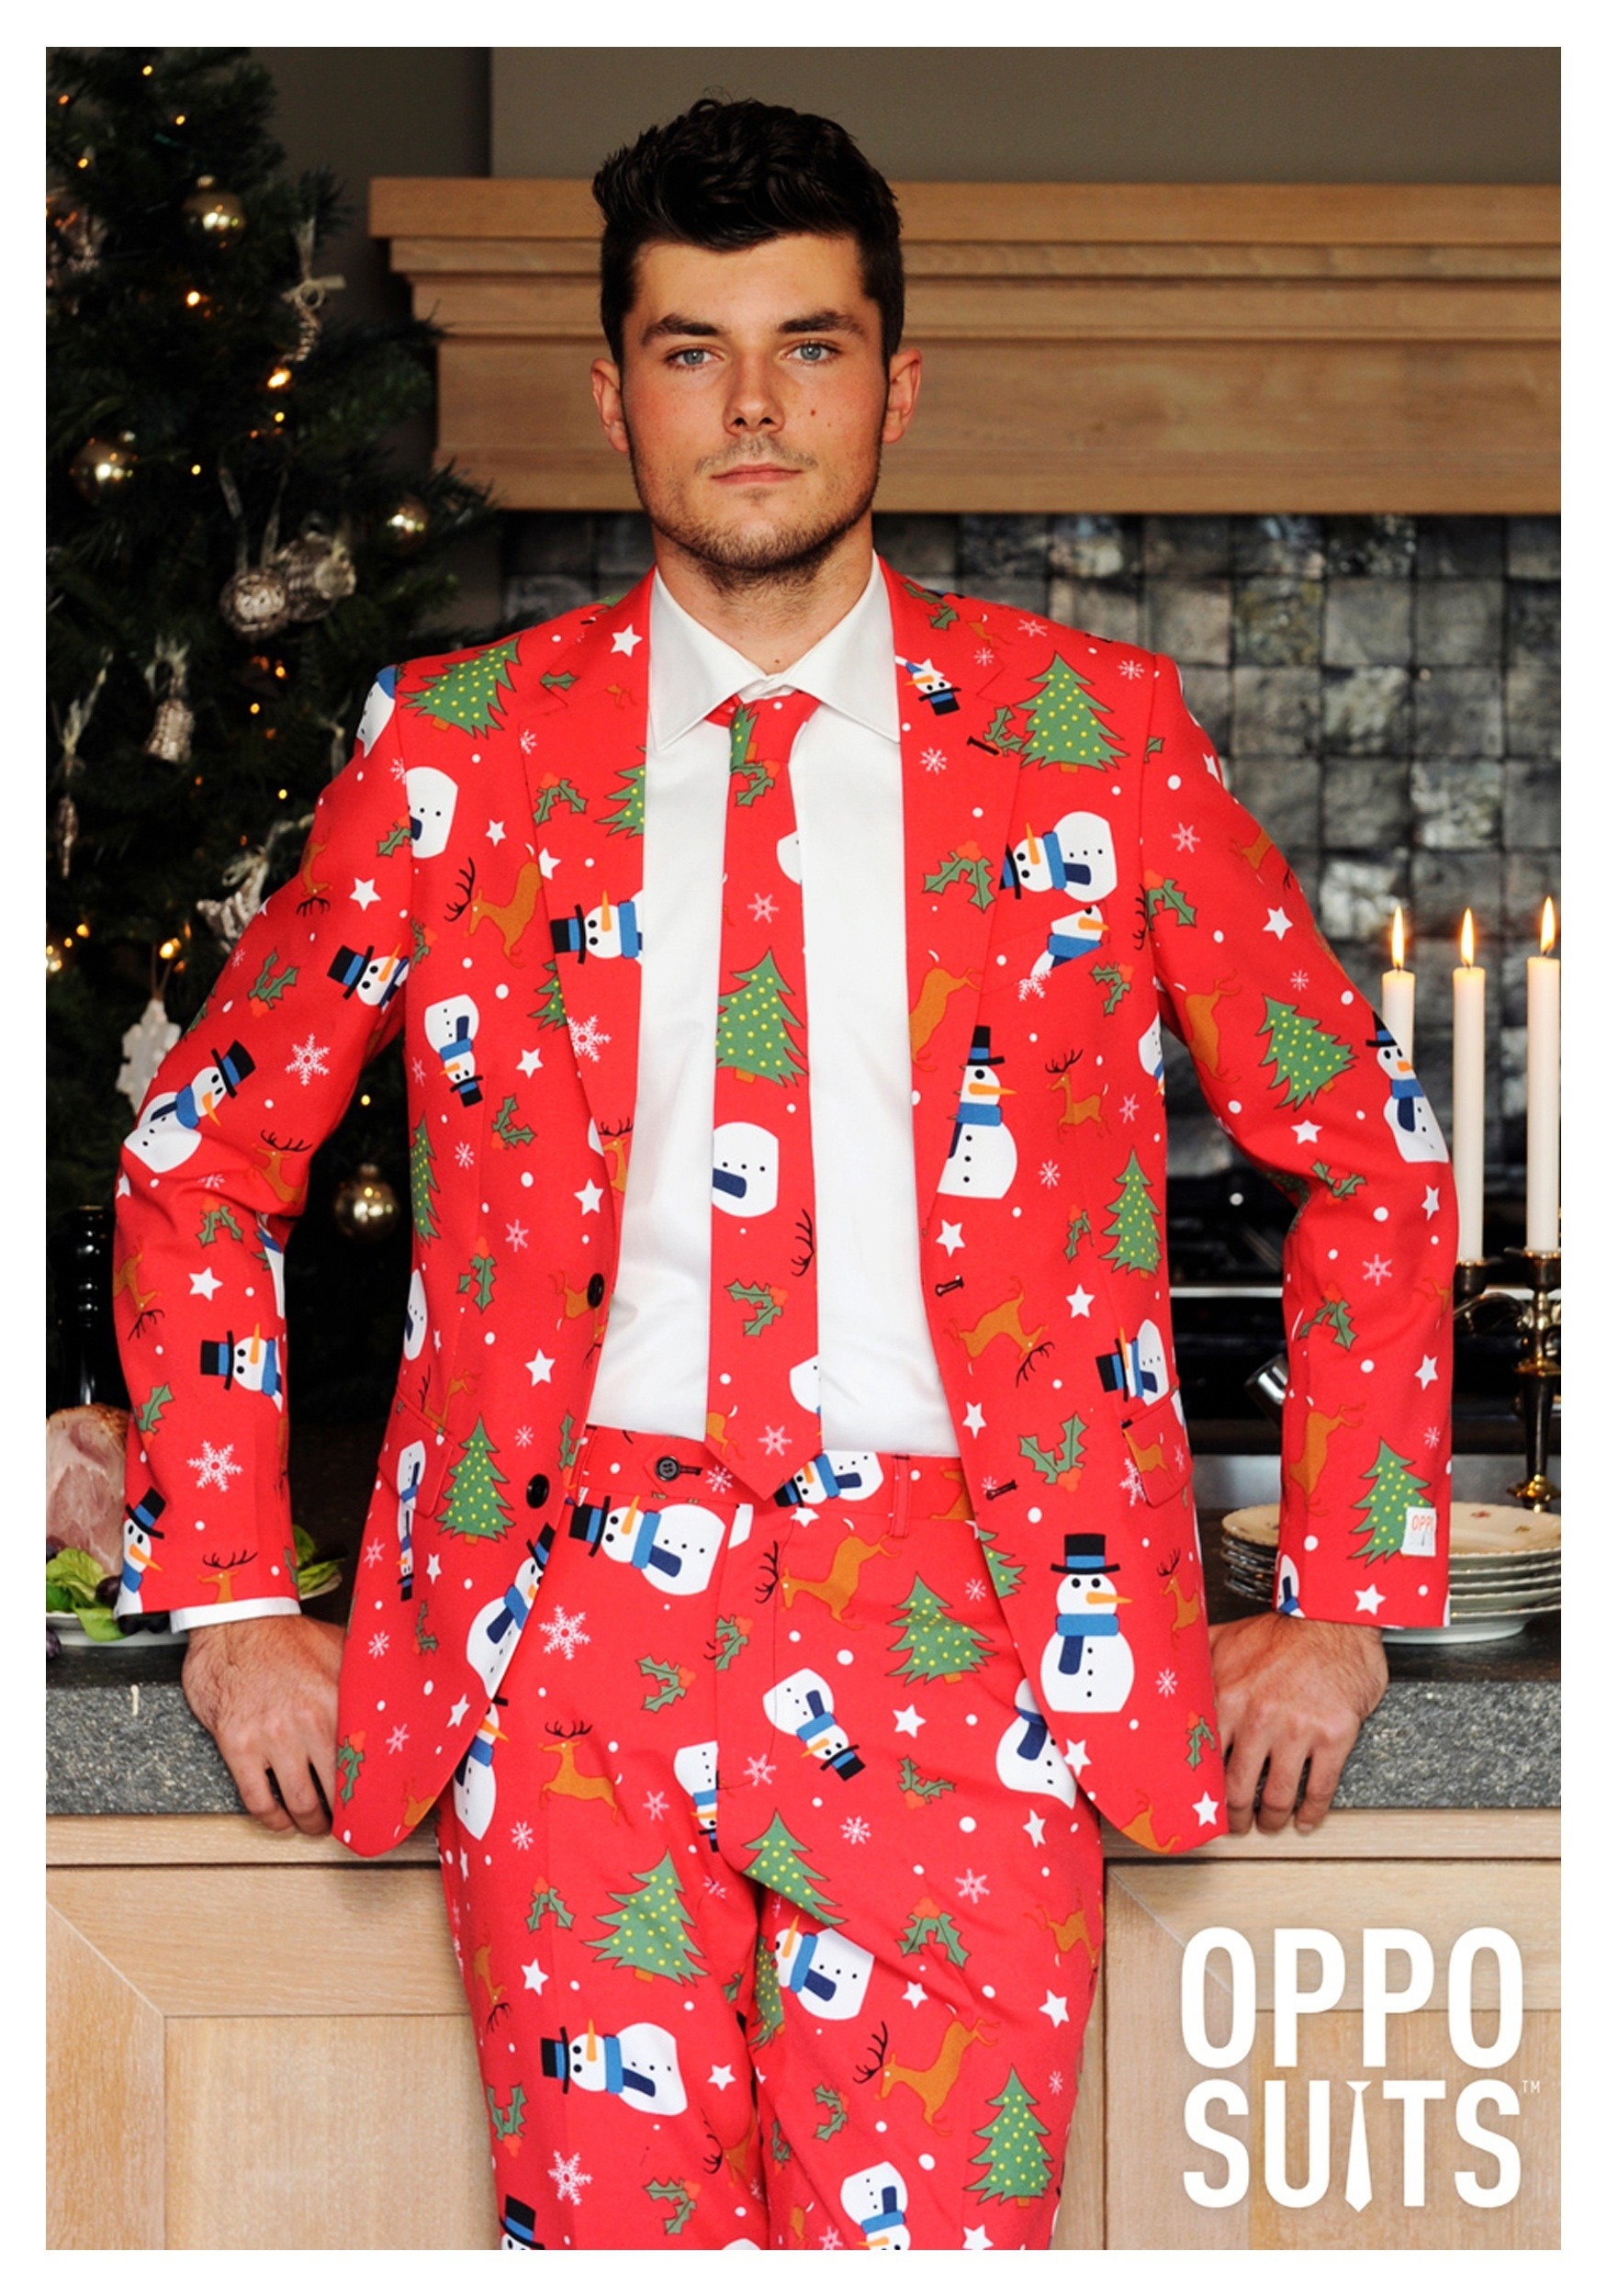 Image of Men's OppoSuits Red Christmas Costume Suit ID OSOSUI0020-44